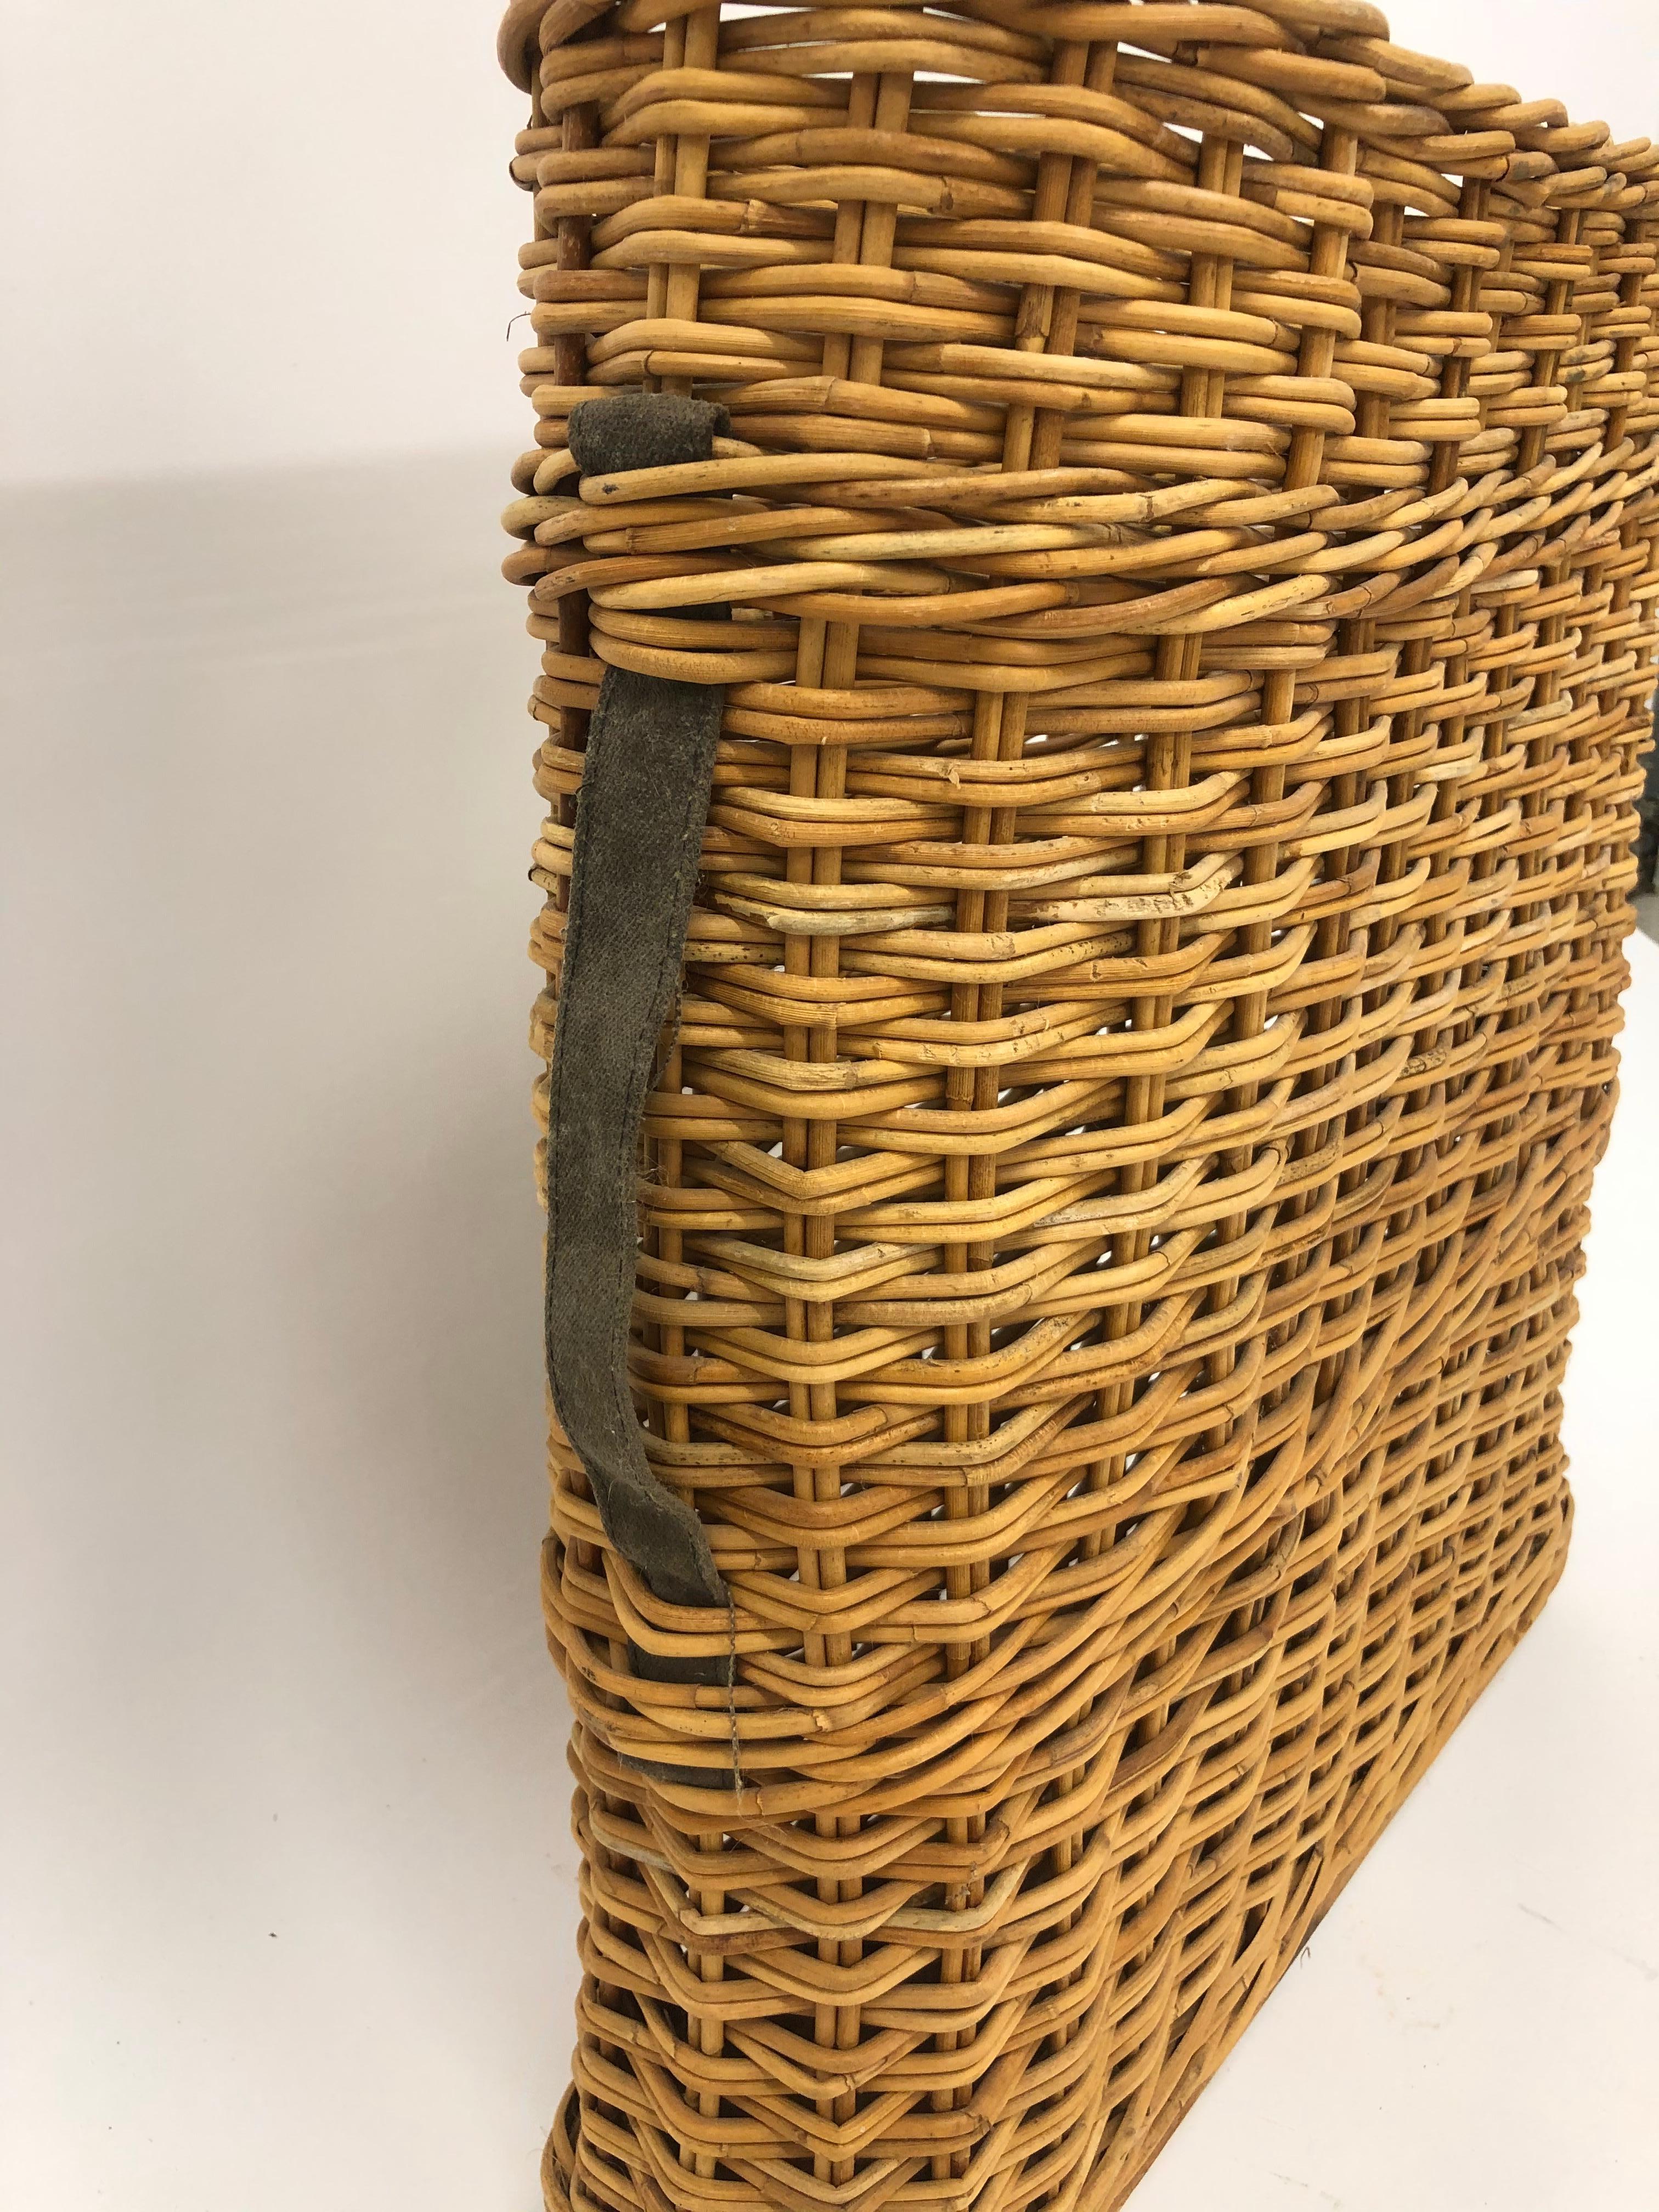 French basket for bottles with canvas straps.

Property from esteemed interior designer Juan Montoya. Juan Montoya is one of the most acclaimed and prolific interior designers in the world today. Juan Montoya was born and spent his early years in